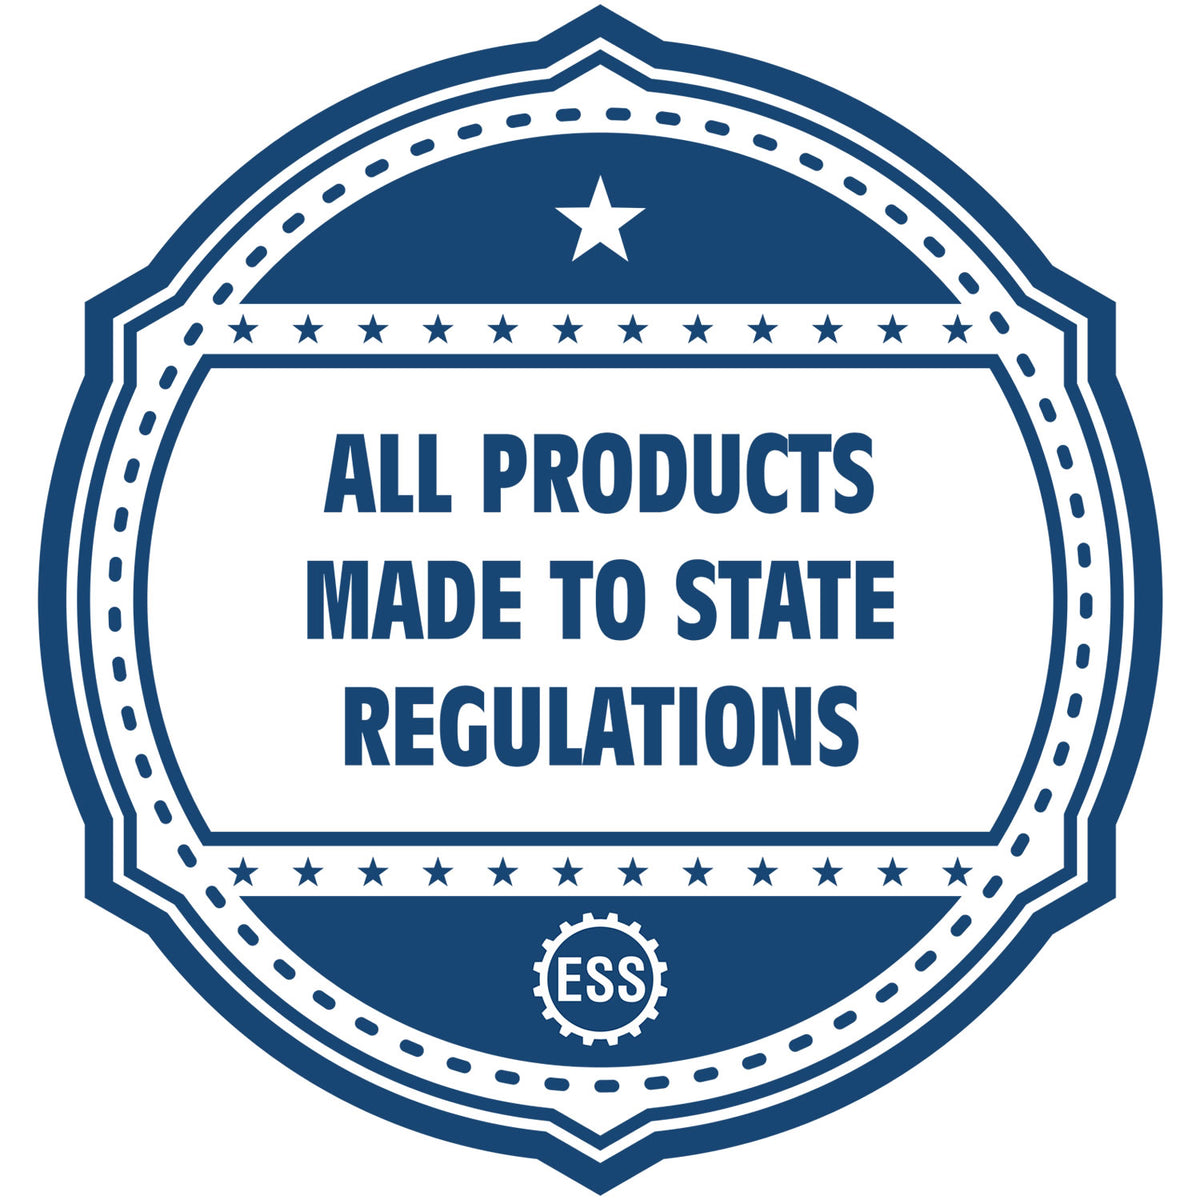 An icon or badge element for the Premium MaxLight Pre-Inked West Virginia Engineering Stamp showing that this product is made in compliance with state regulations.